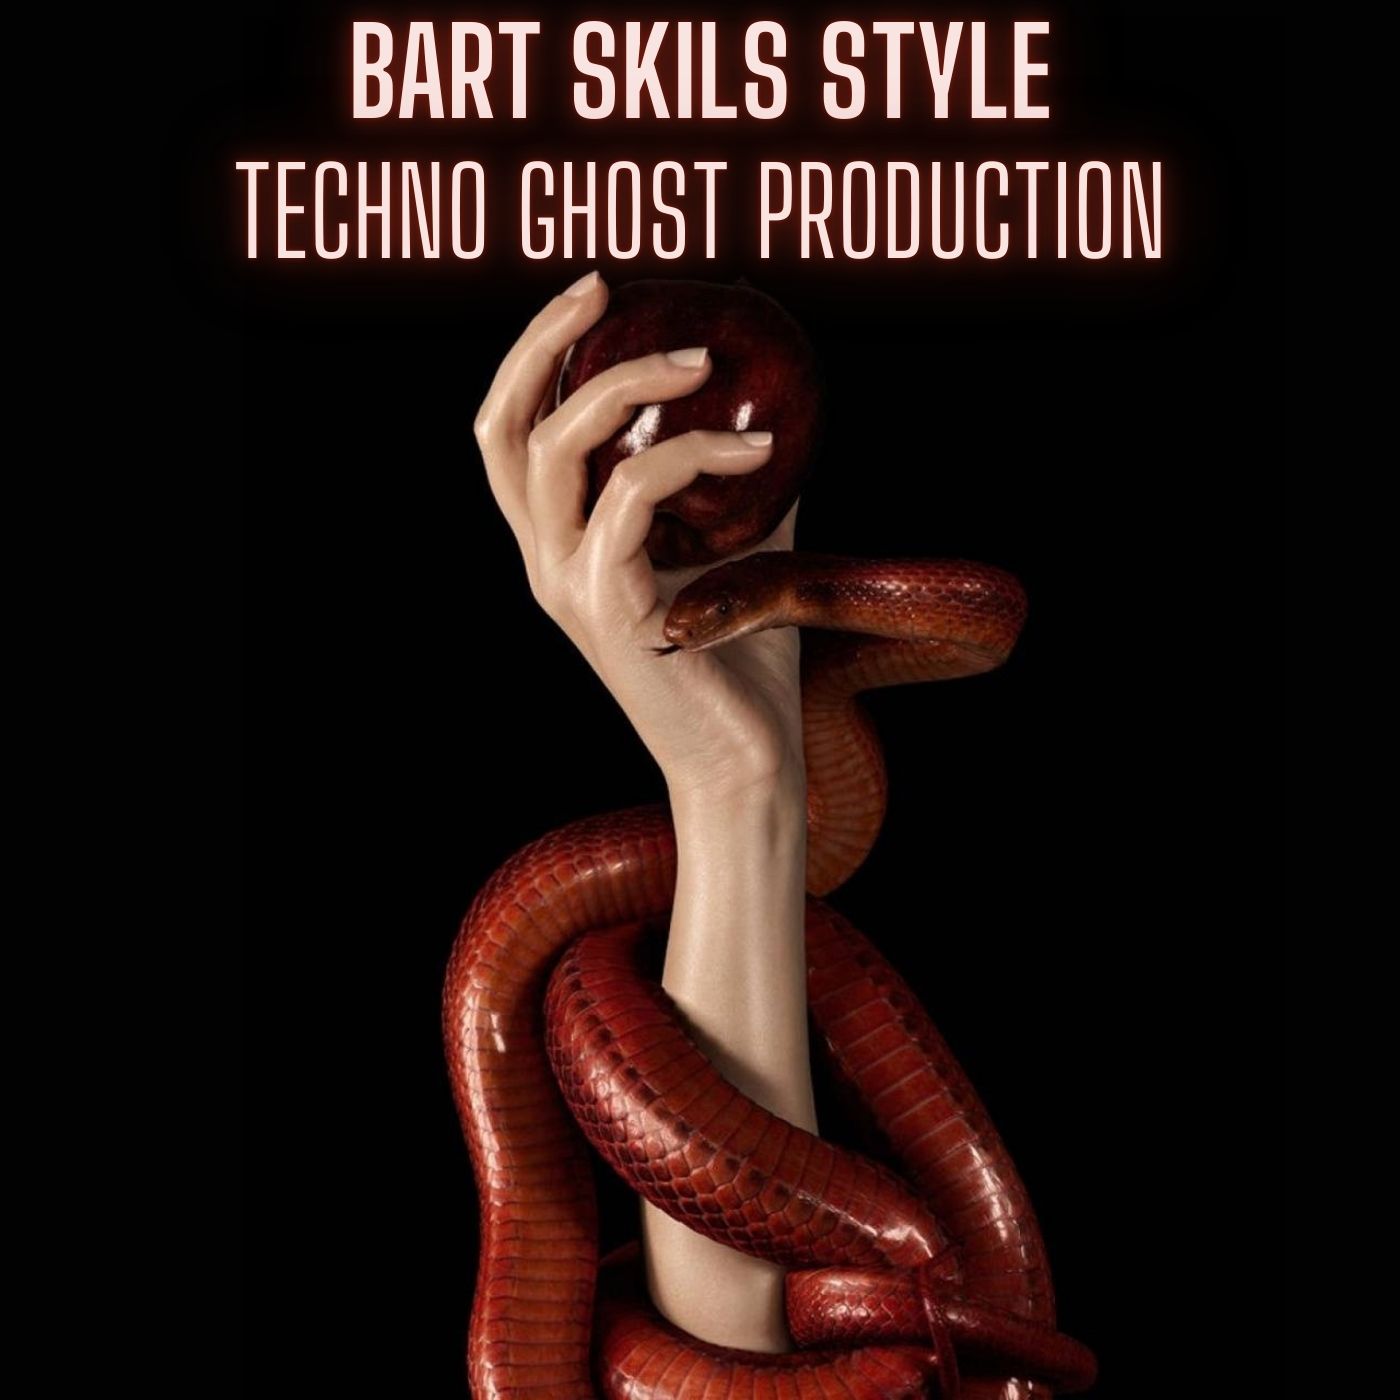 Bart Skils Style Techno Ghost Production